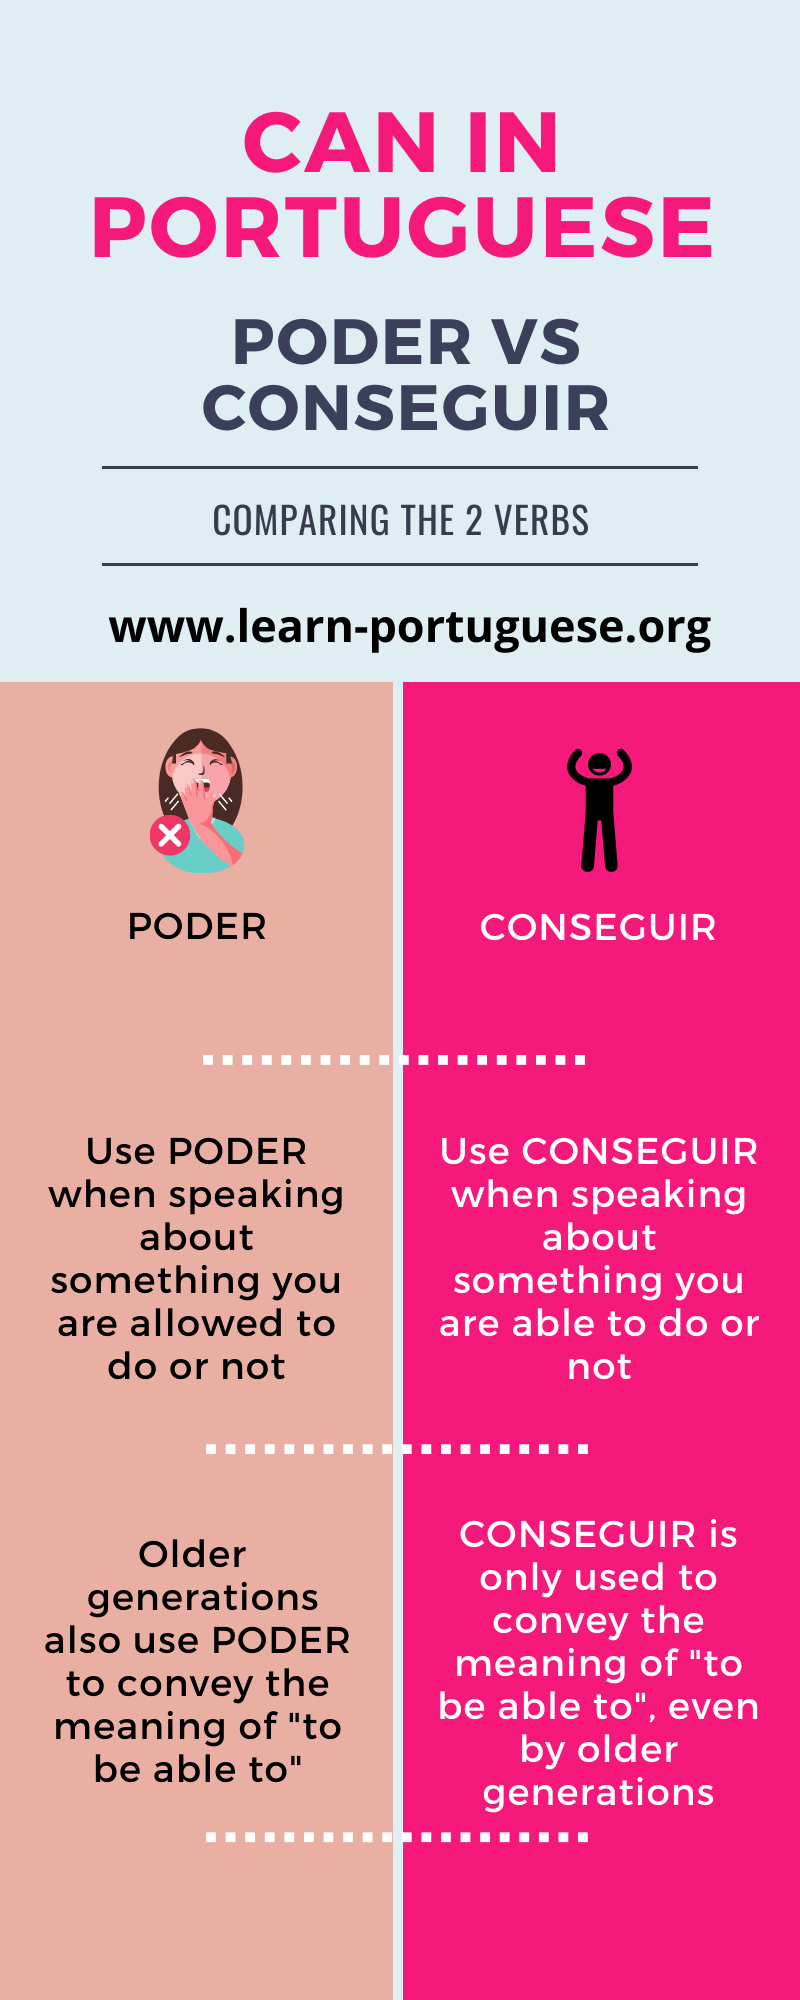 6 meanings of the verb ficar in Portuguese